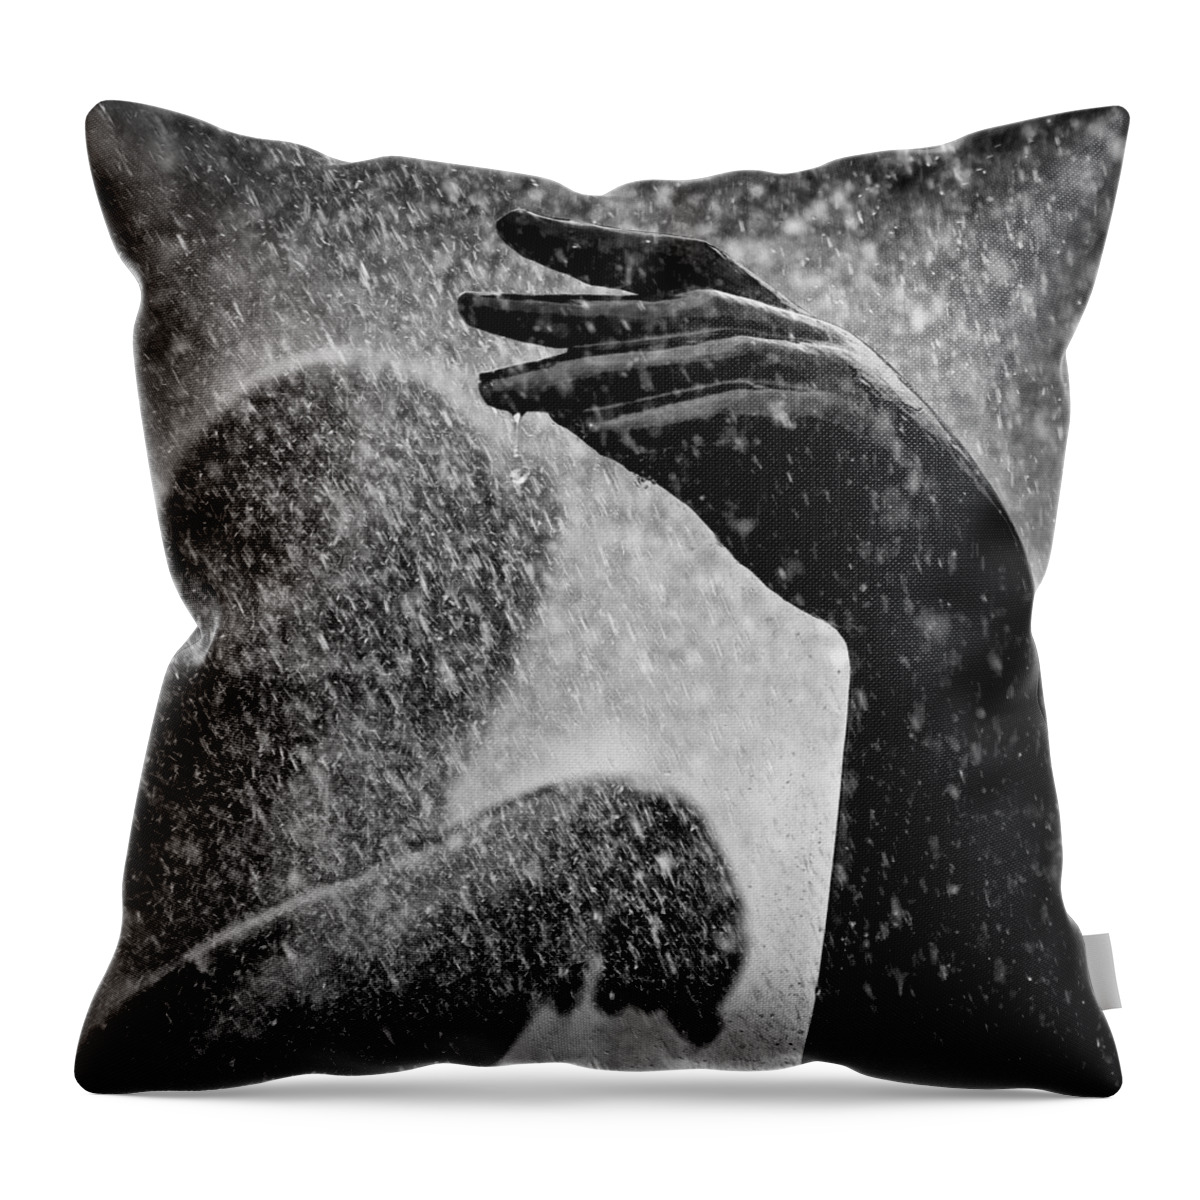 Fountain Throw Pillow featuring the photograph Spray by Dave Bowman